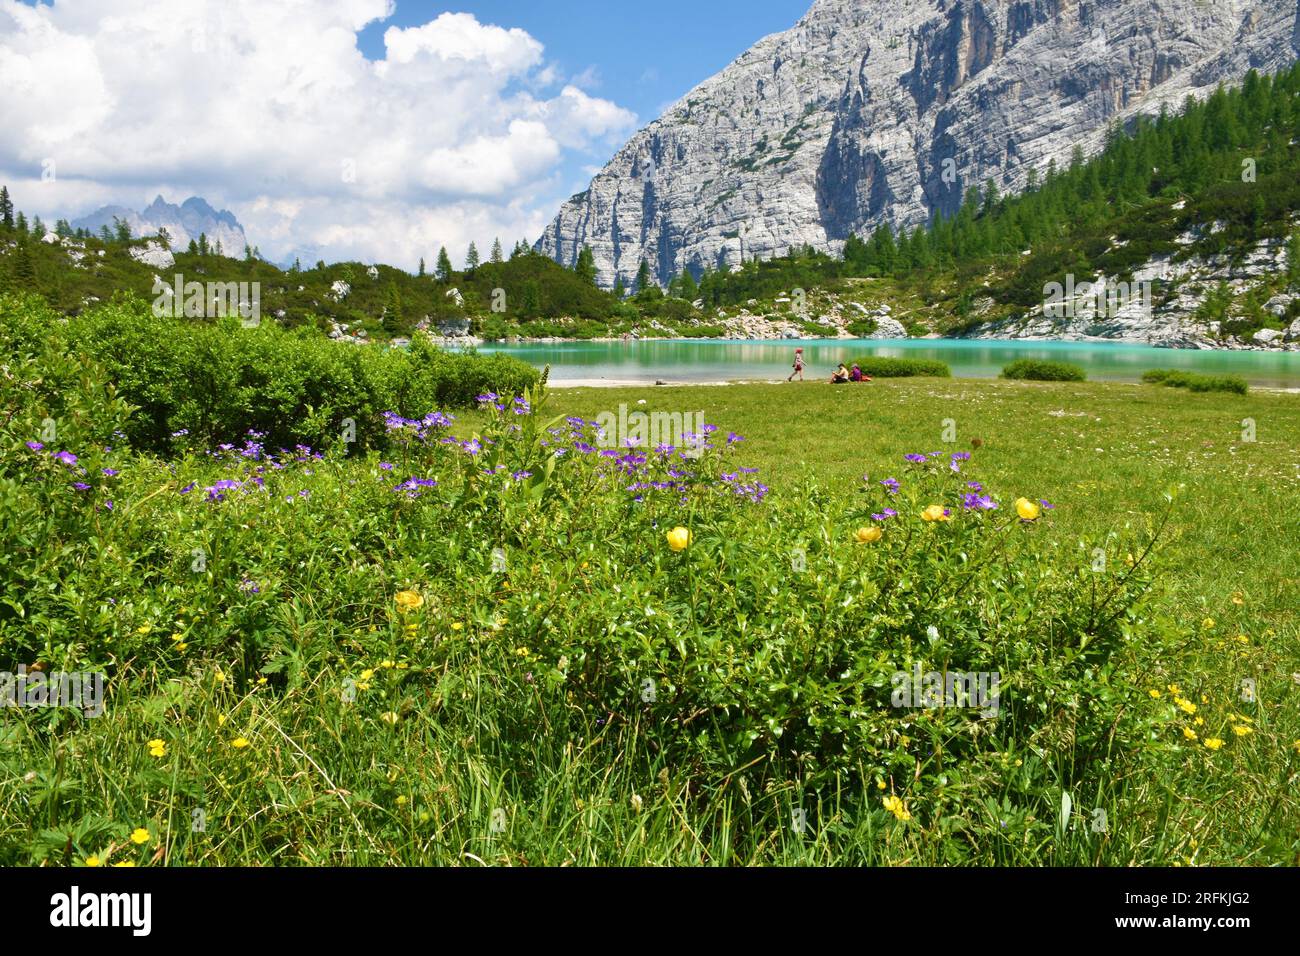 Wood cranesbill (Geranium sylvaticum) flowers growing at a meadow at lake Sorapis near Cortina d'Ampezzo in Veneto region and Belluno province in Ital Stock Photo